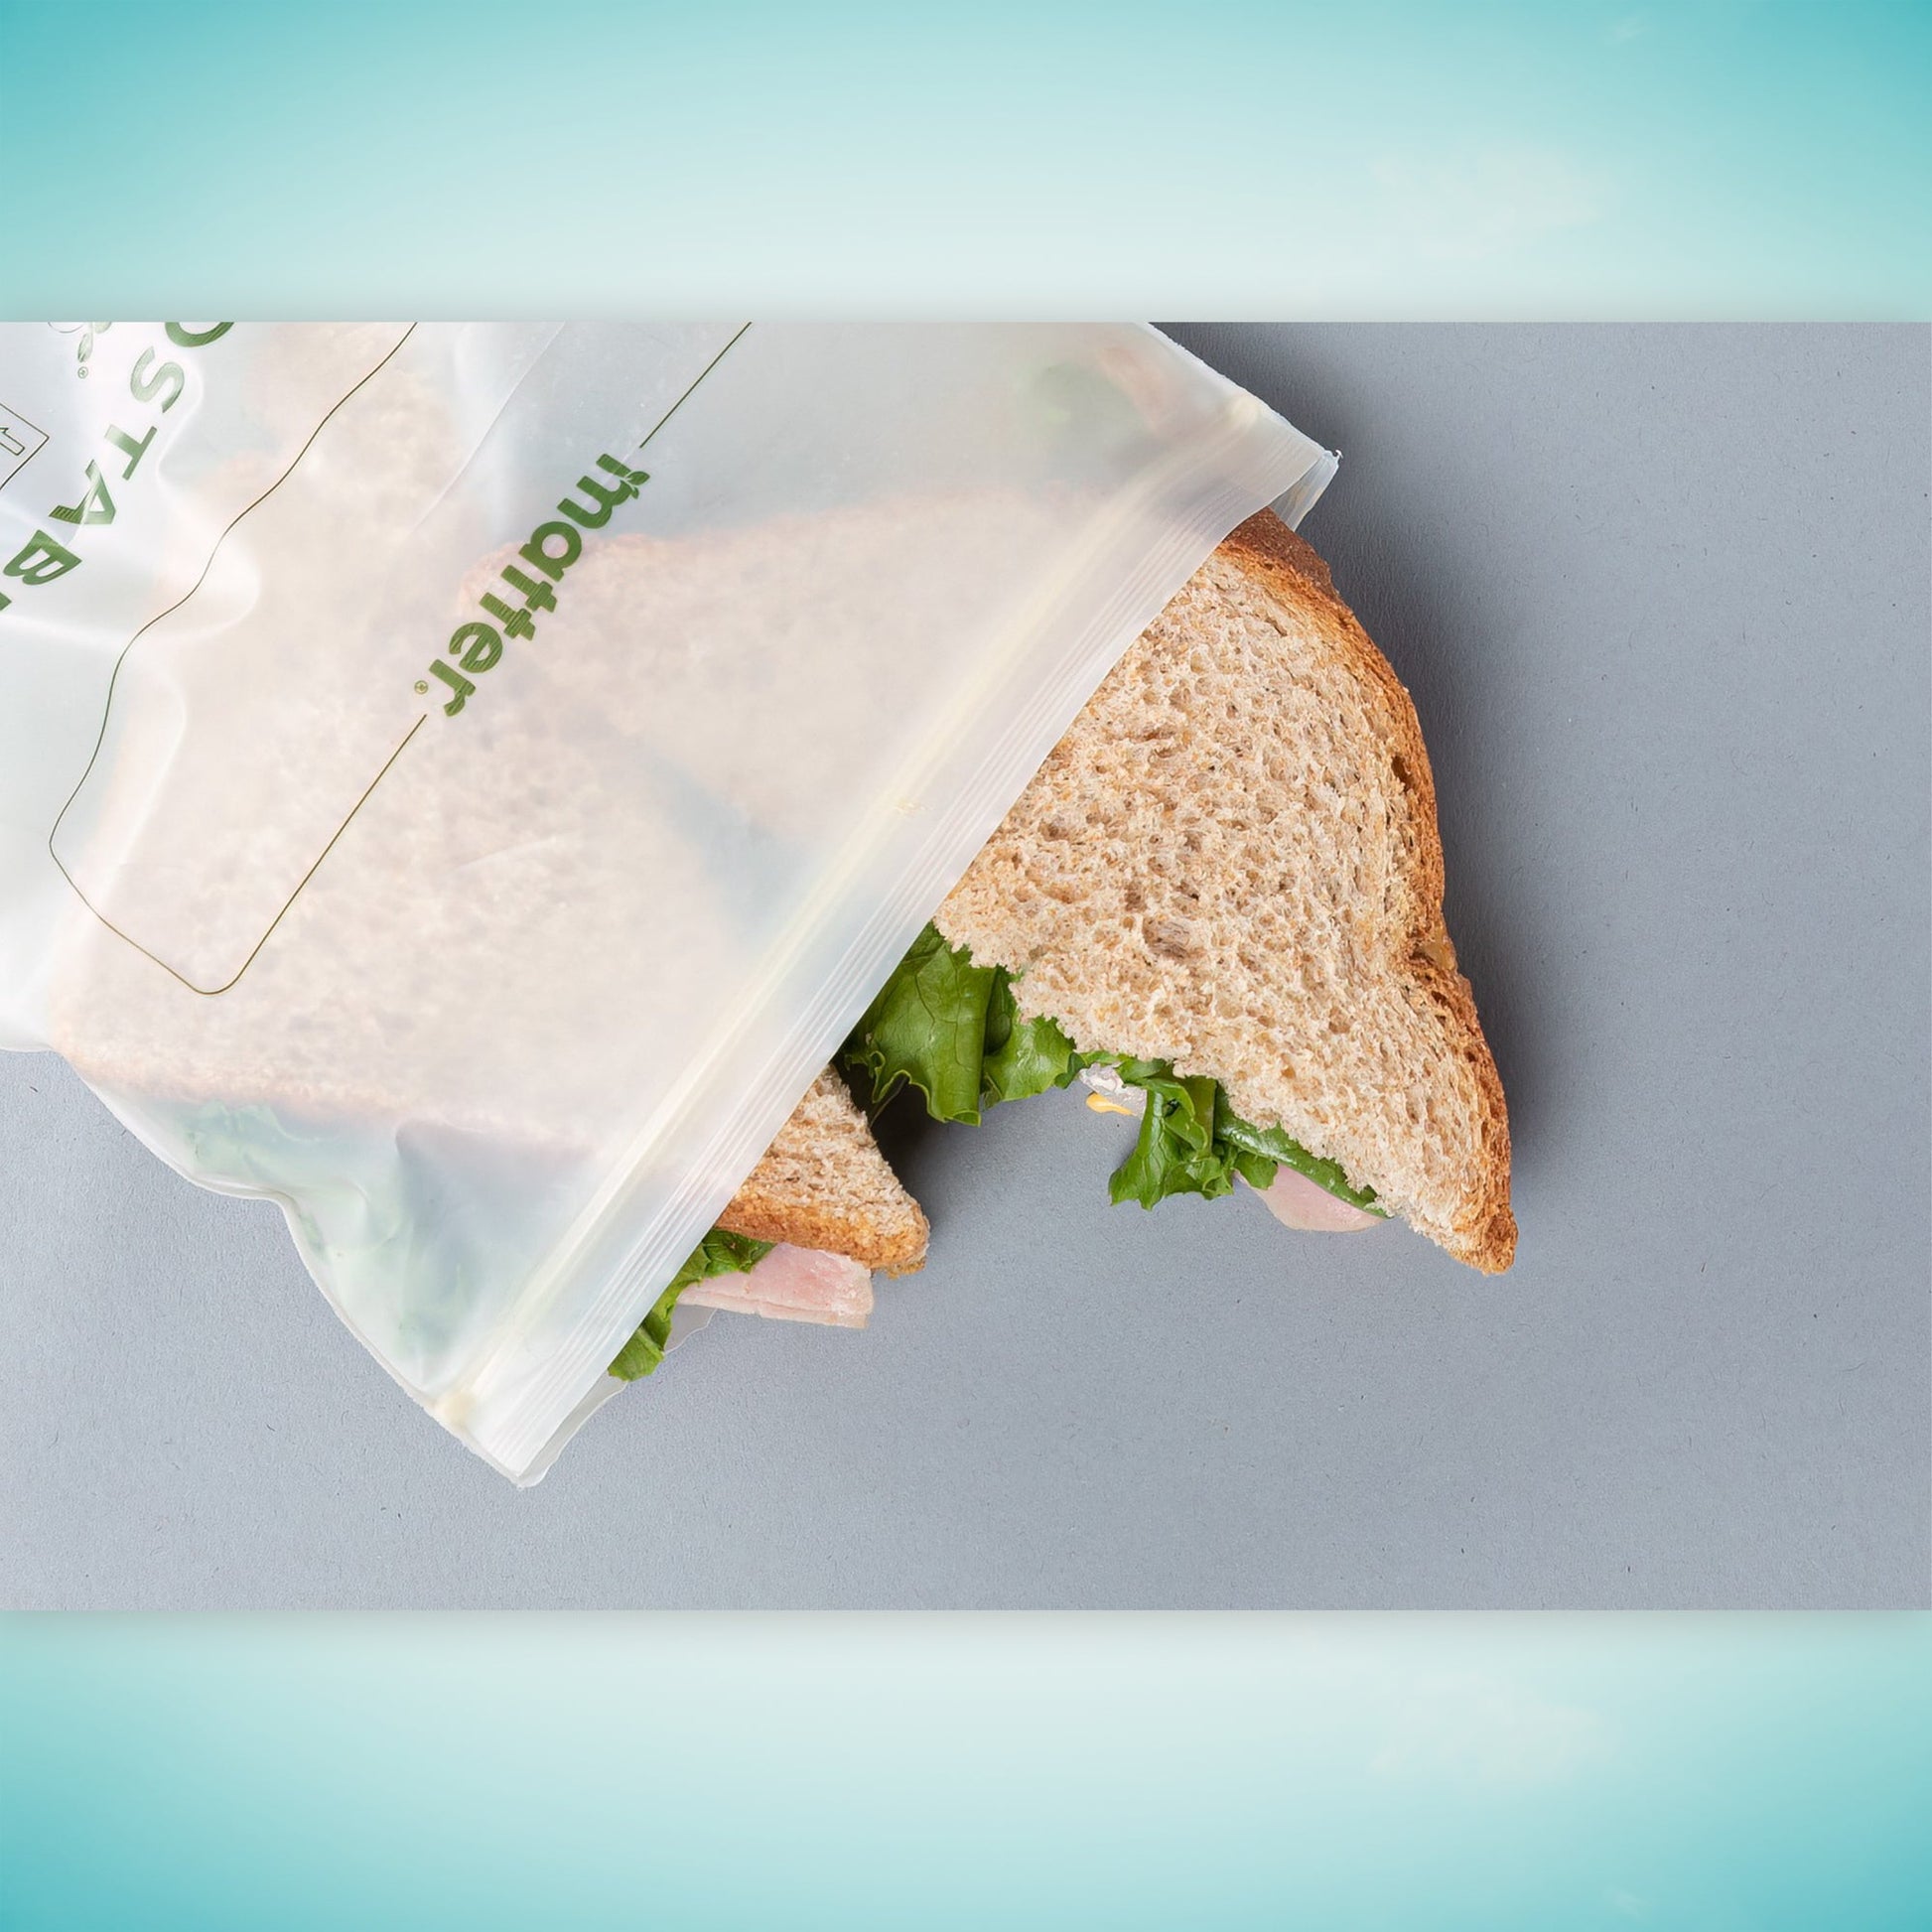 Our Family Resealable Sandwich Bags, 50 count